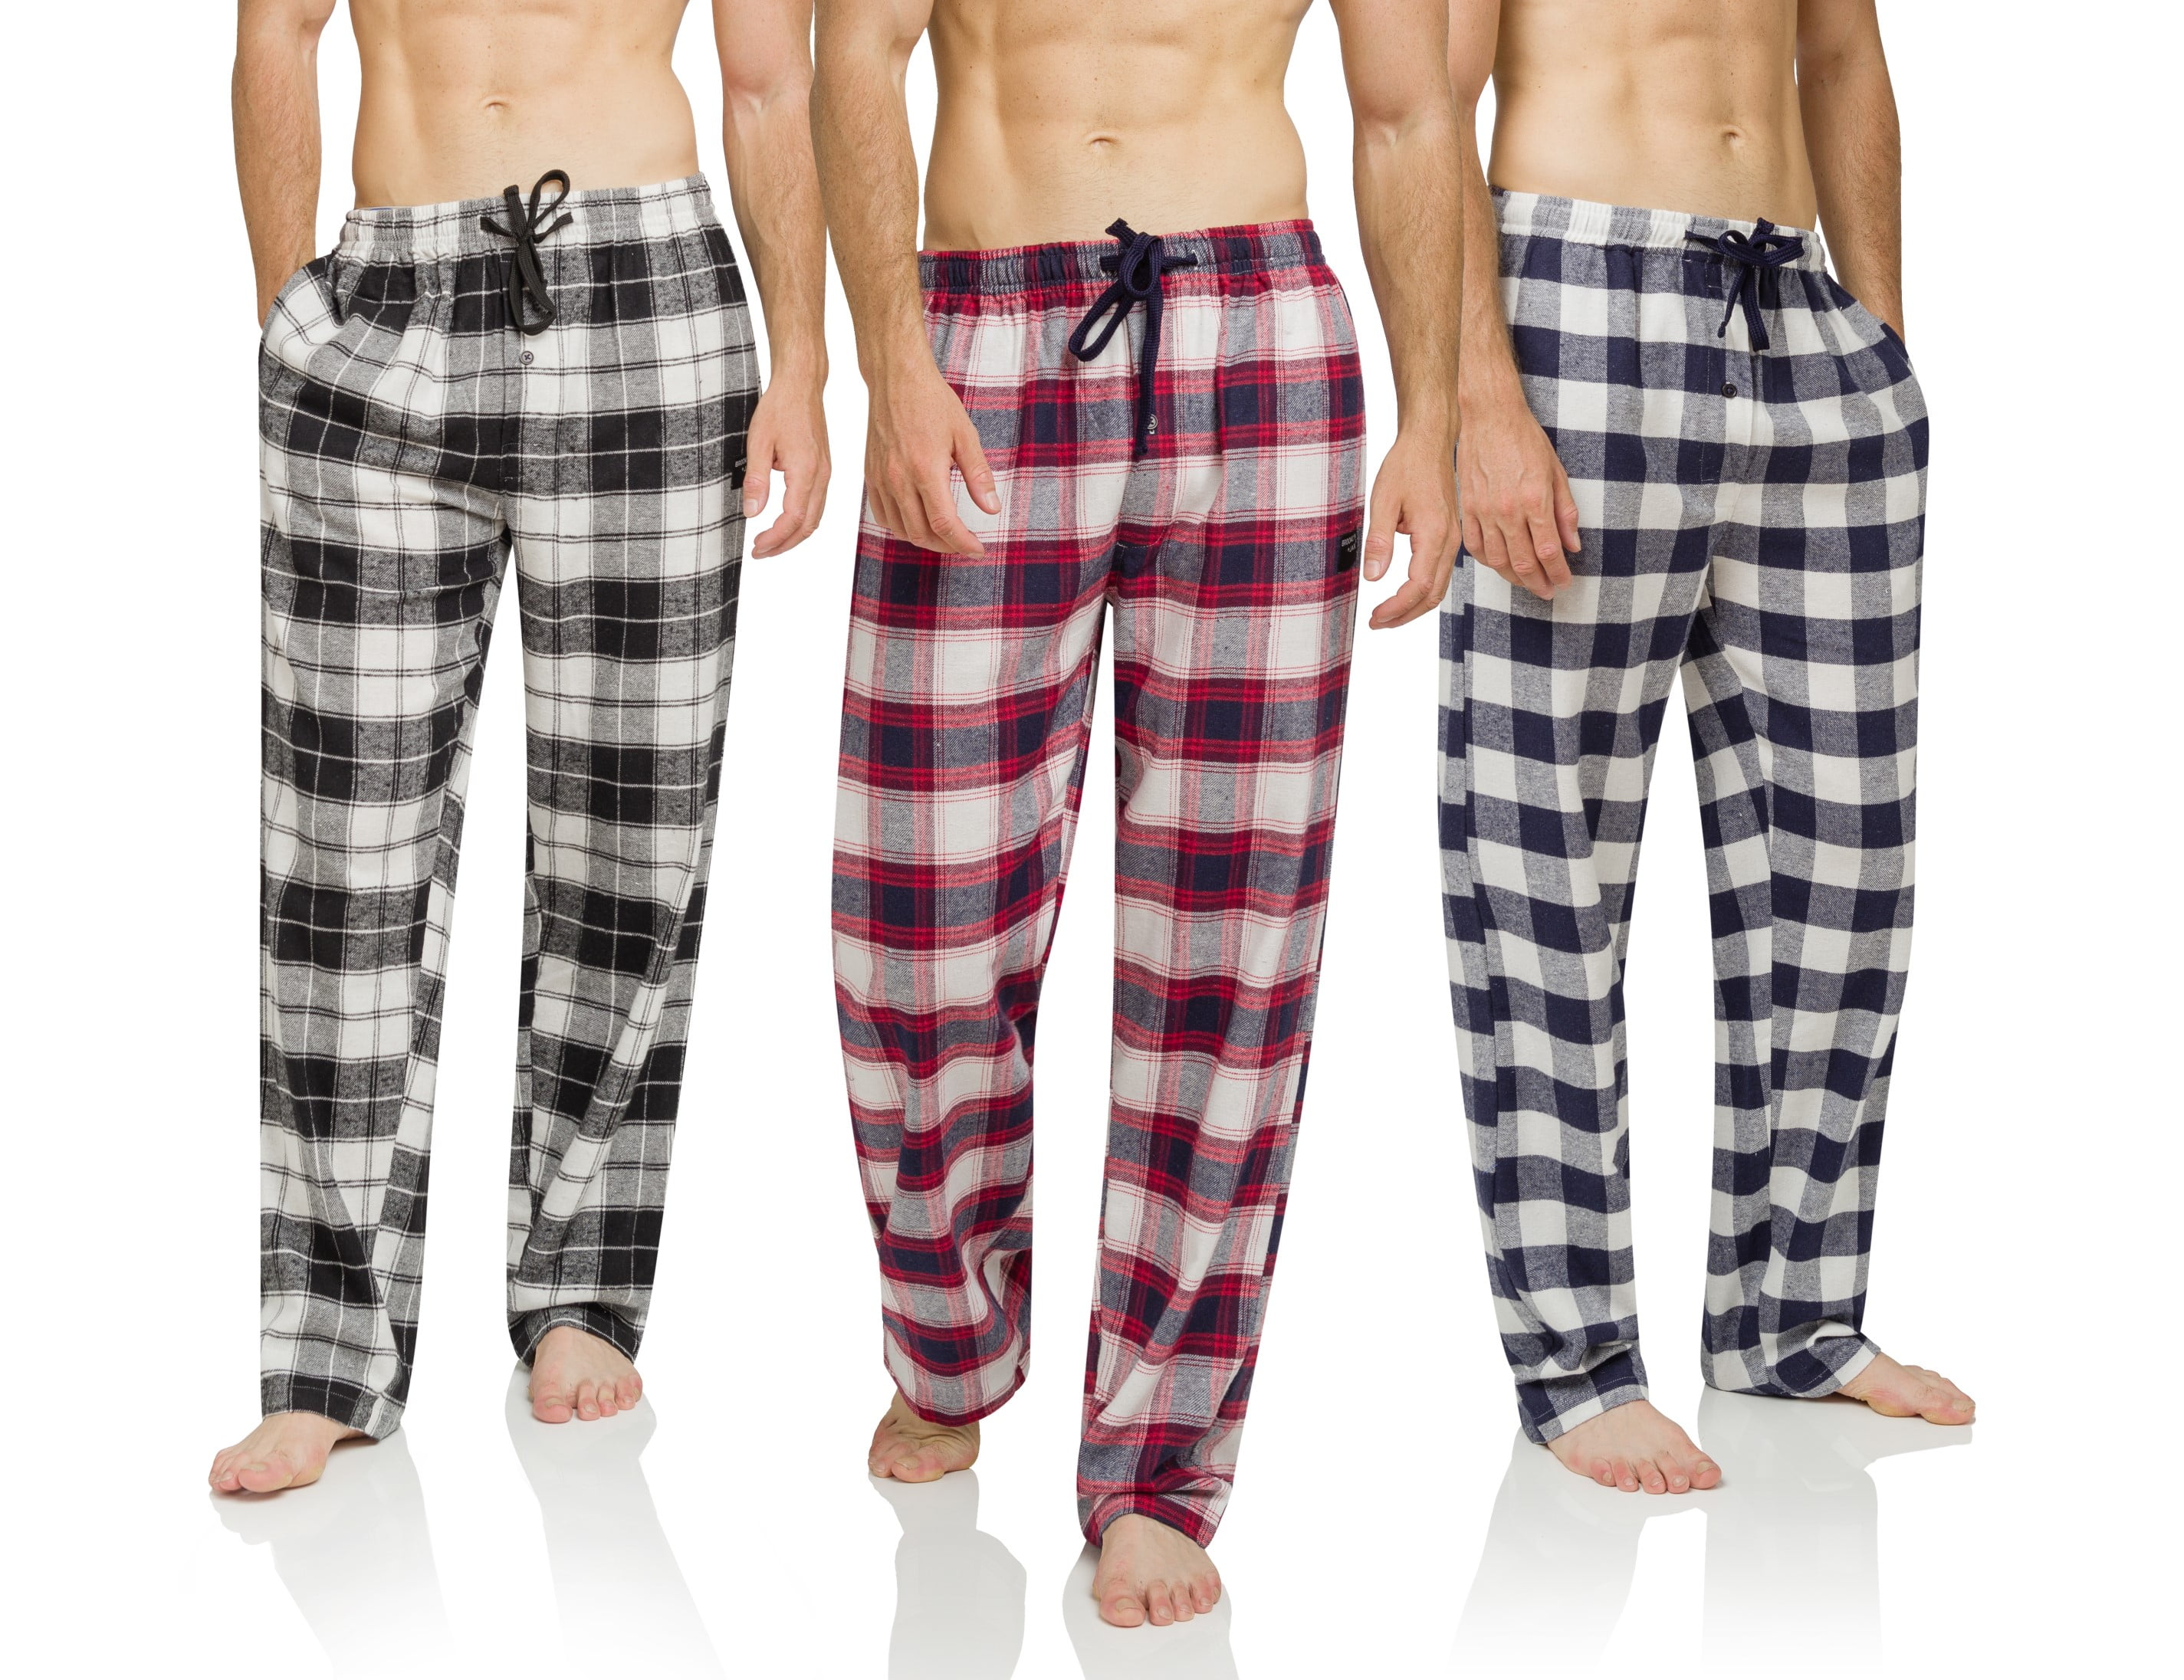 Brooklyn Jax Ultra Soft Flannel Pajama for Men in 3 Pack, size small ...